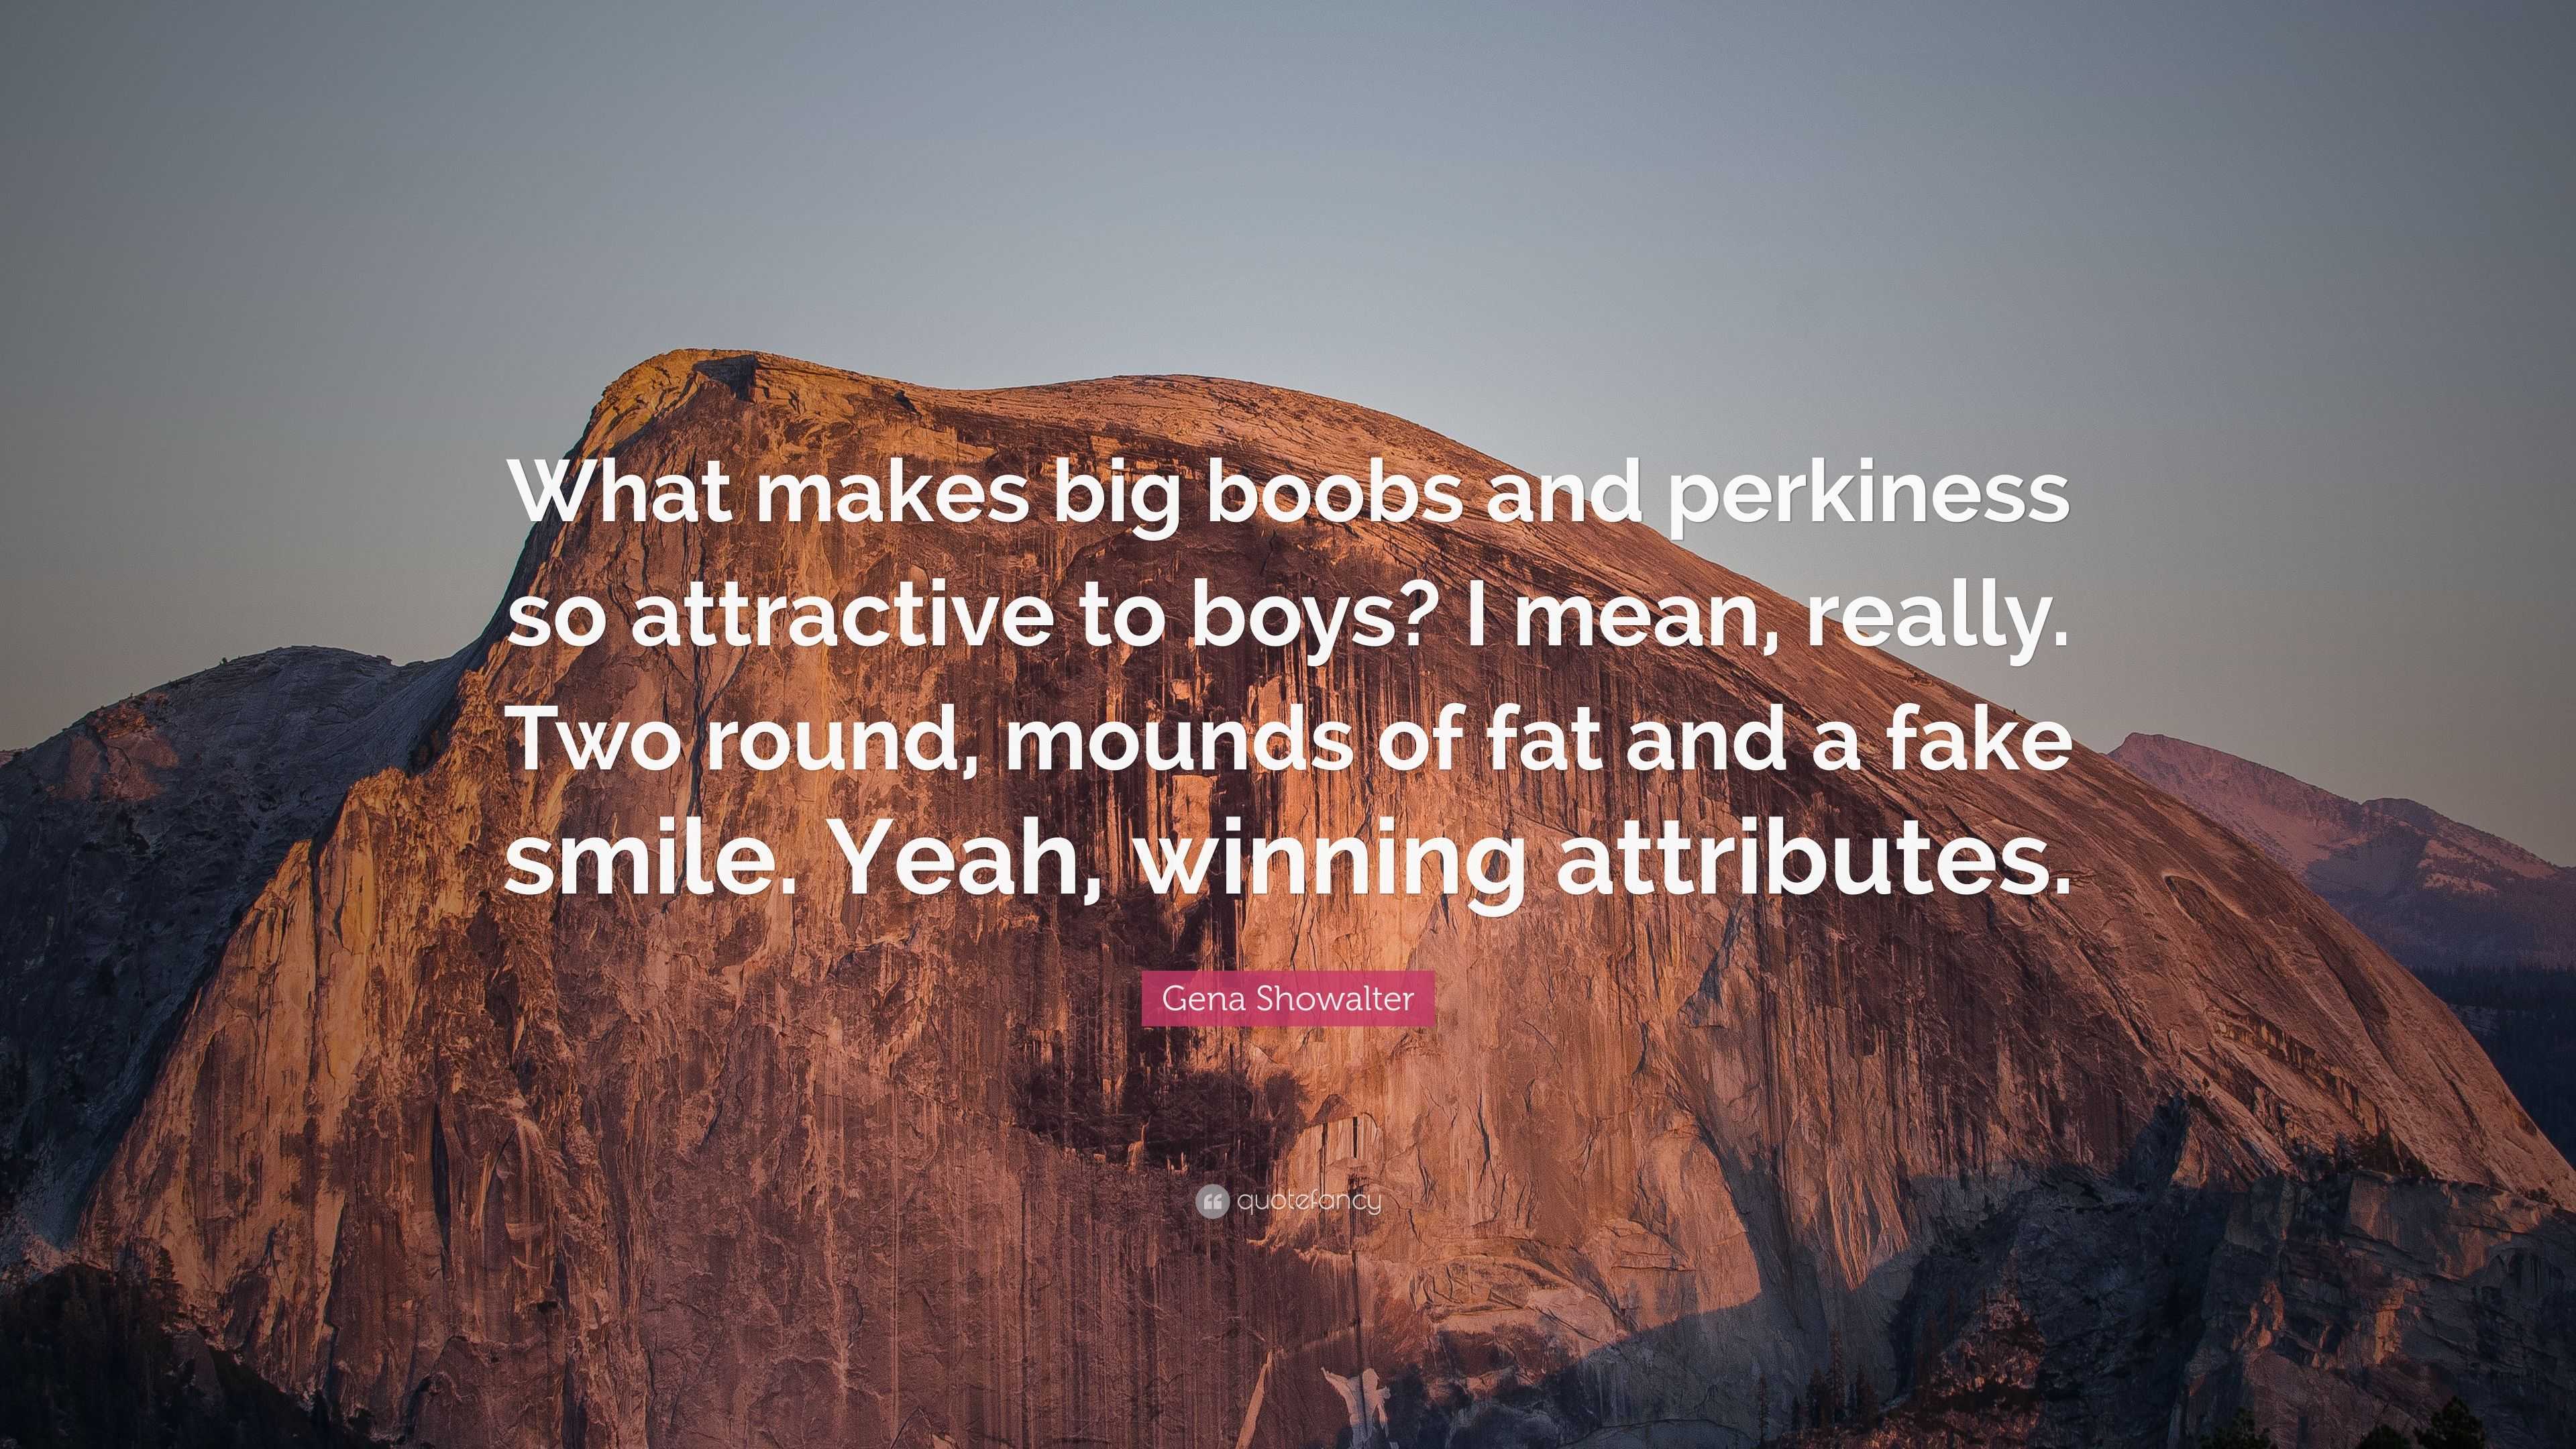 Gena Showalter Quote: “What makes big boobs and perkiness so attractive to  boys? I mean, really. Two round, mounds of fat and a fake smile. Yea”